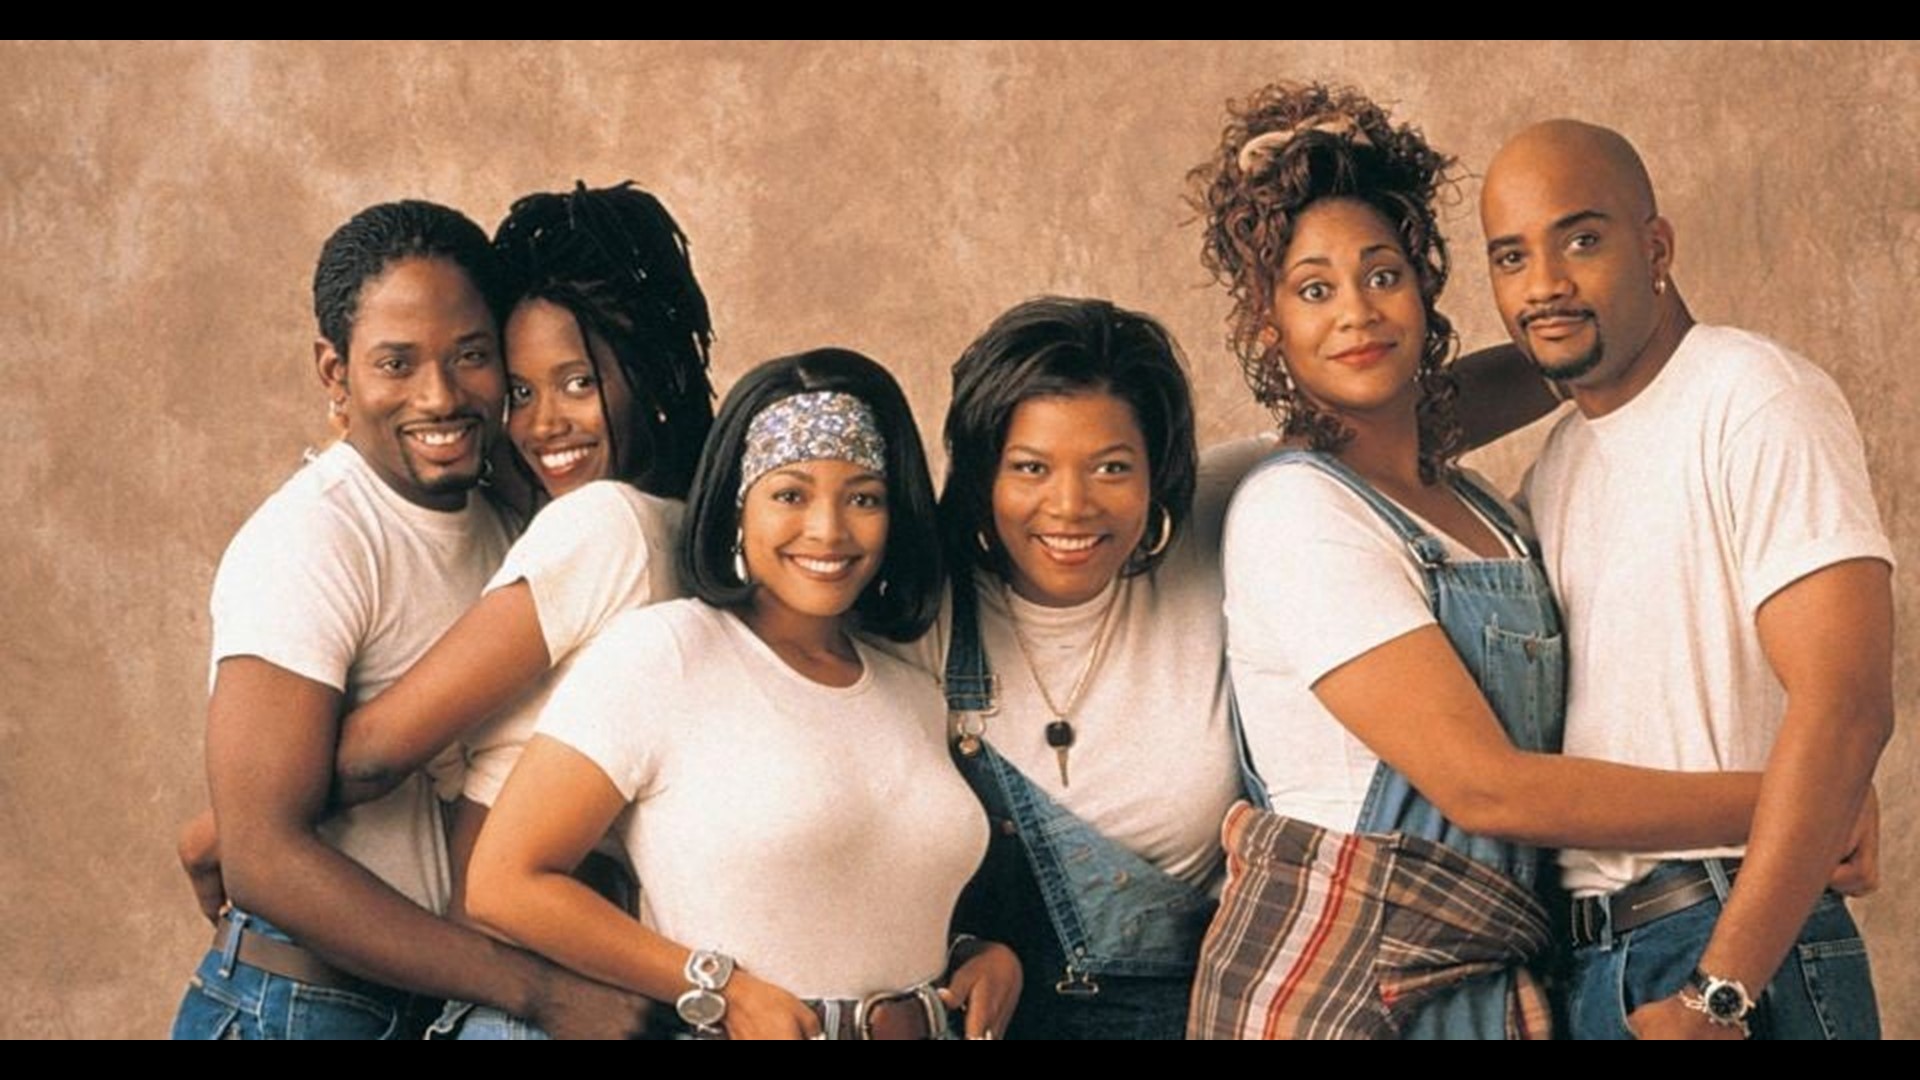 How to Watch the Best Black From the ‘90s & Early ‘00s